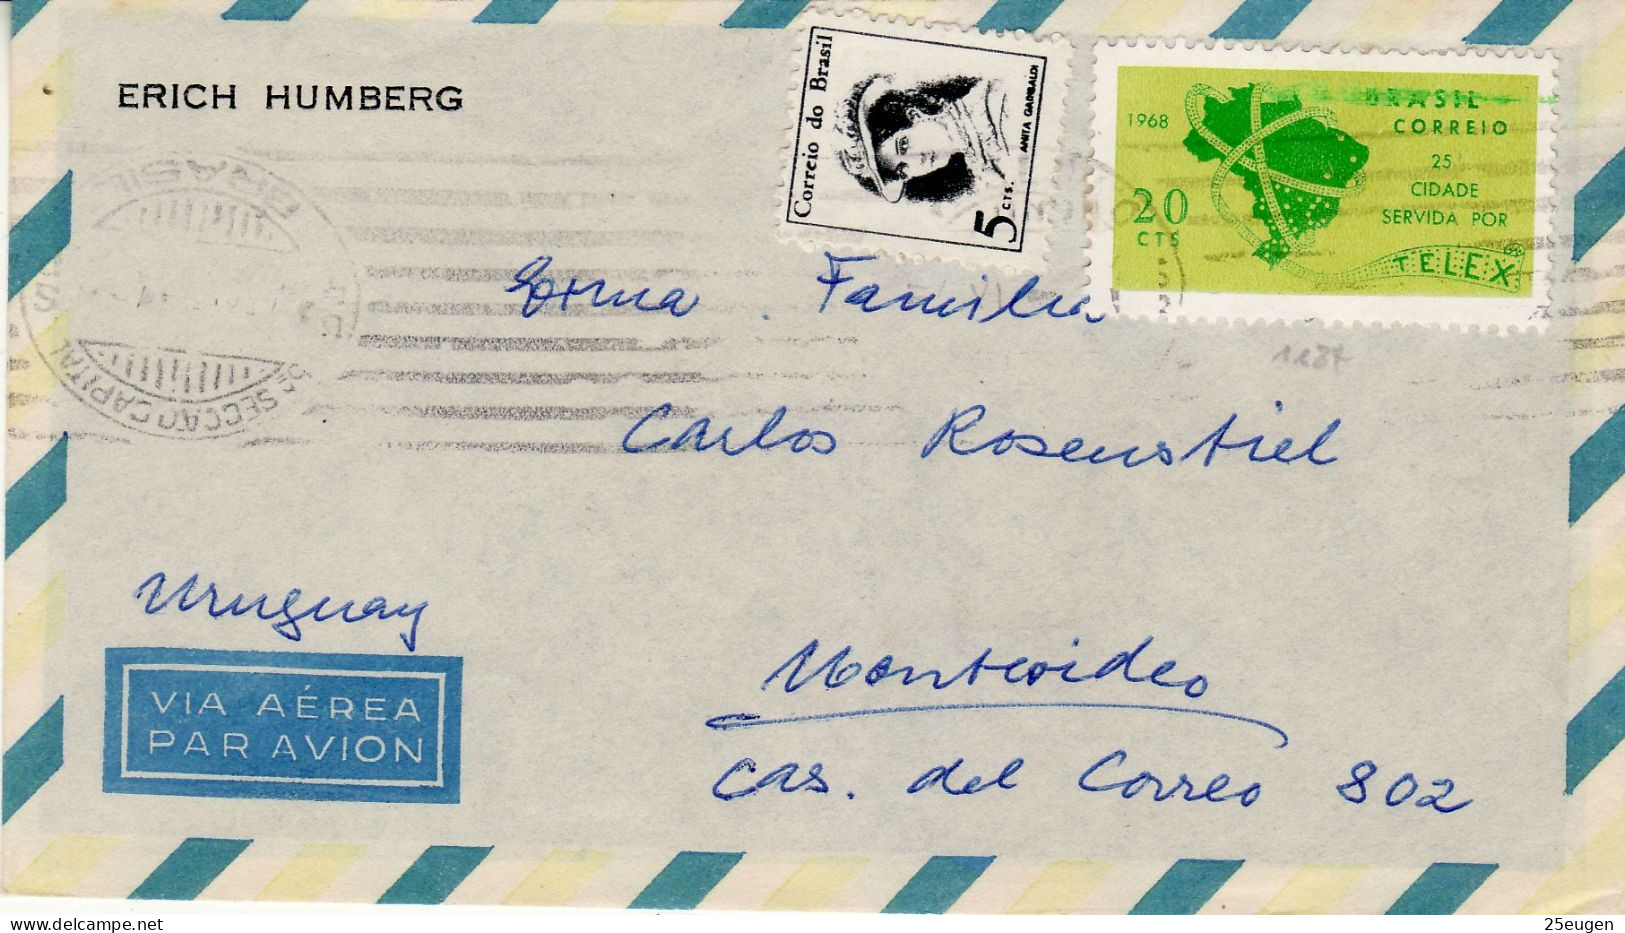 BRAZIL 1968 AIRMAIL  LETTER SENT TO MONTEVIDEO - Covers & Documents